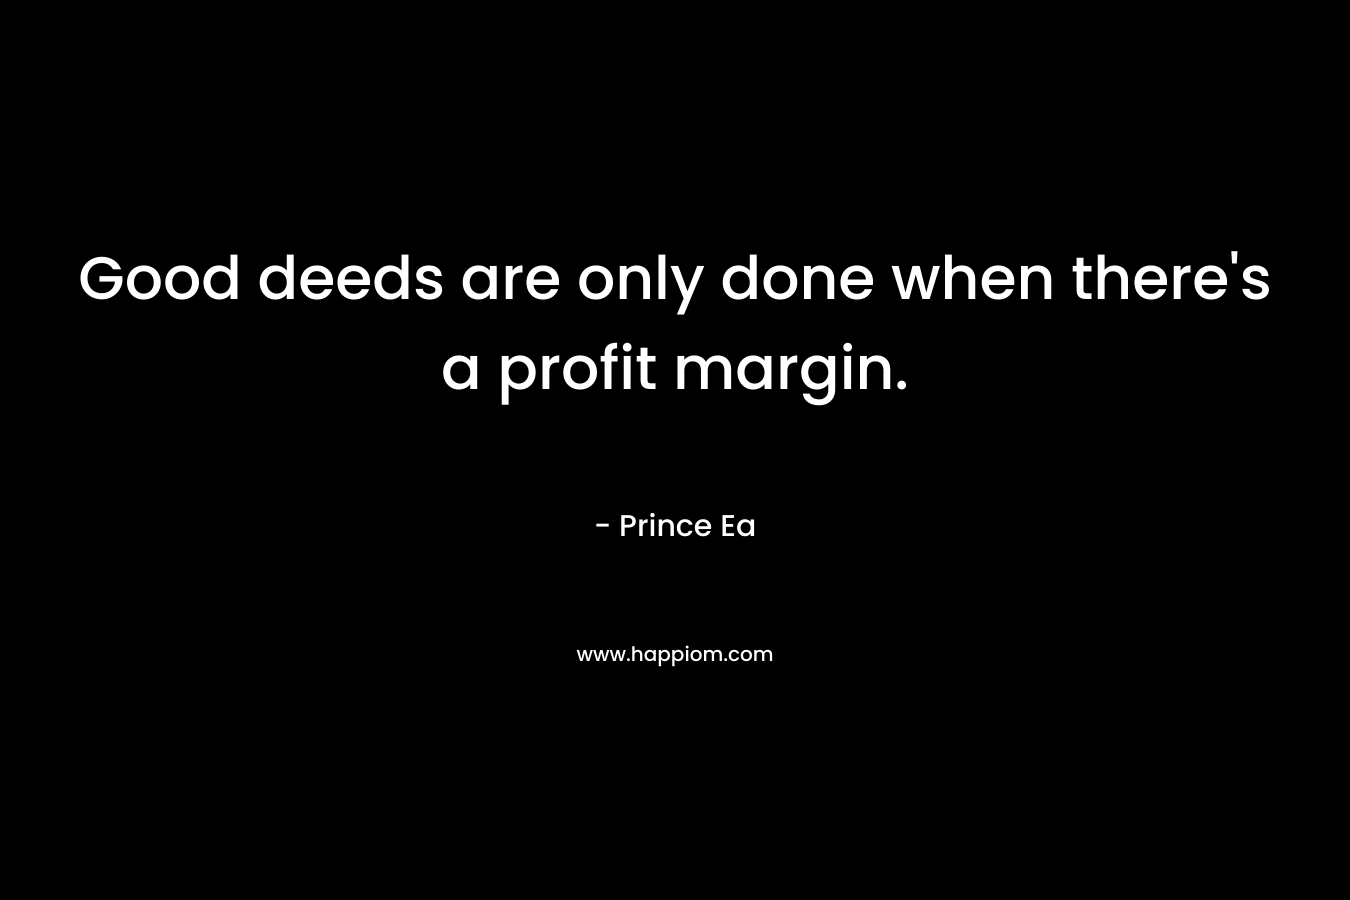 Good deeds are only done when there’s a profit margin. – Prince Ea